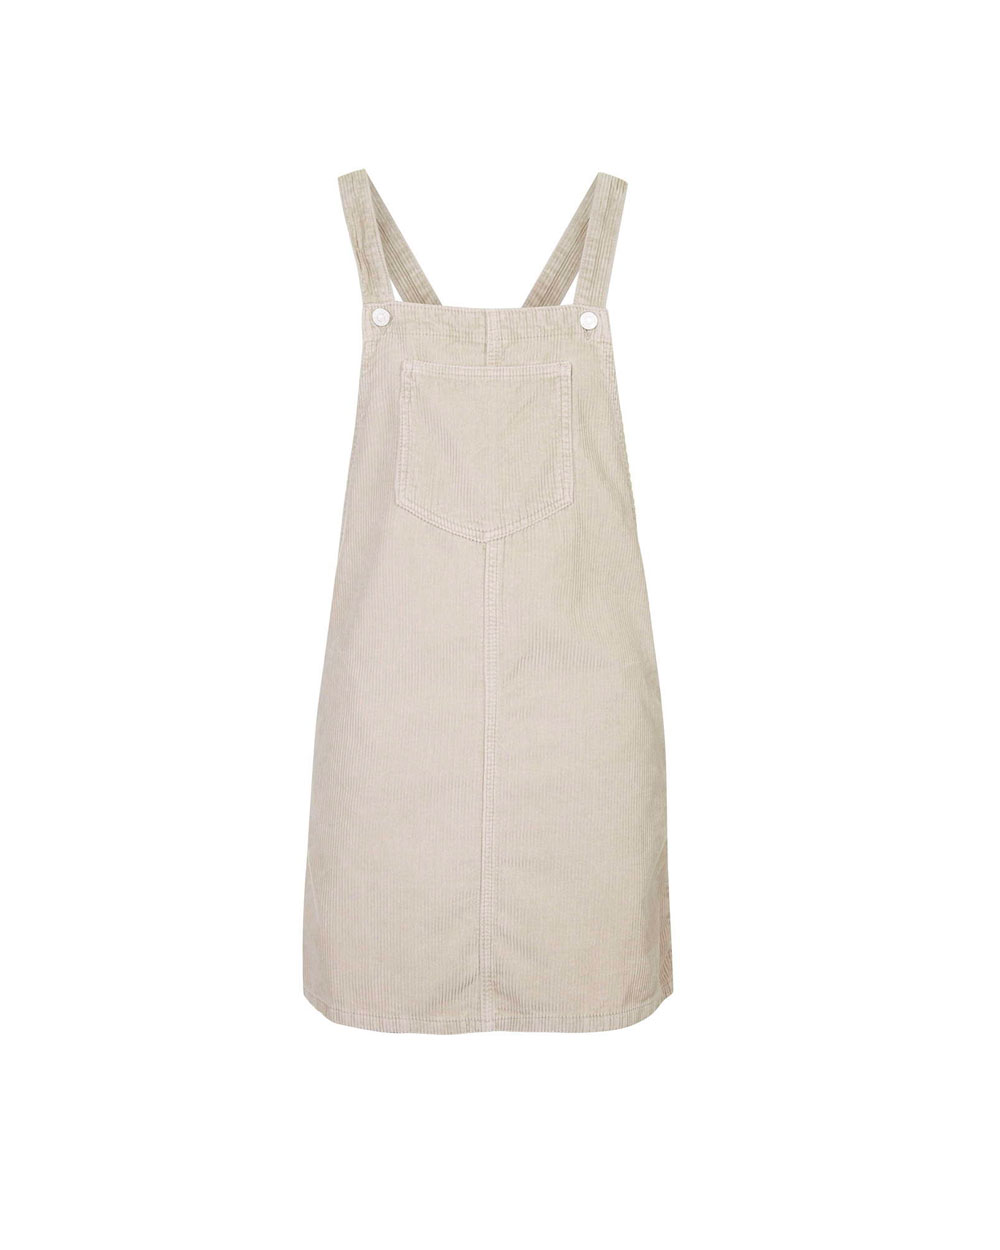 Cord pinafore dress from Topshop